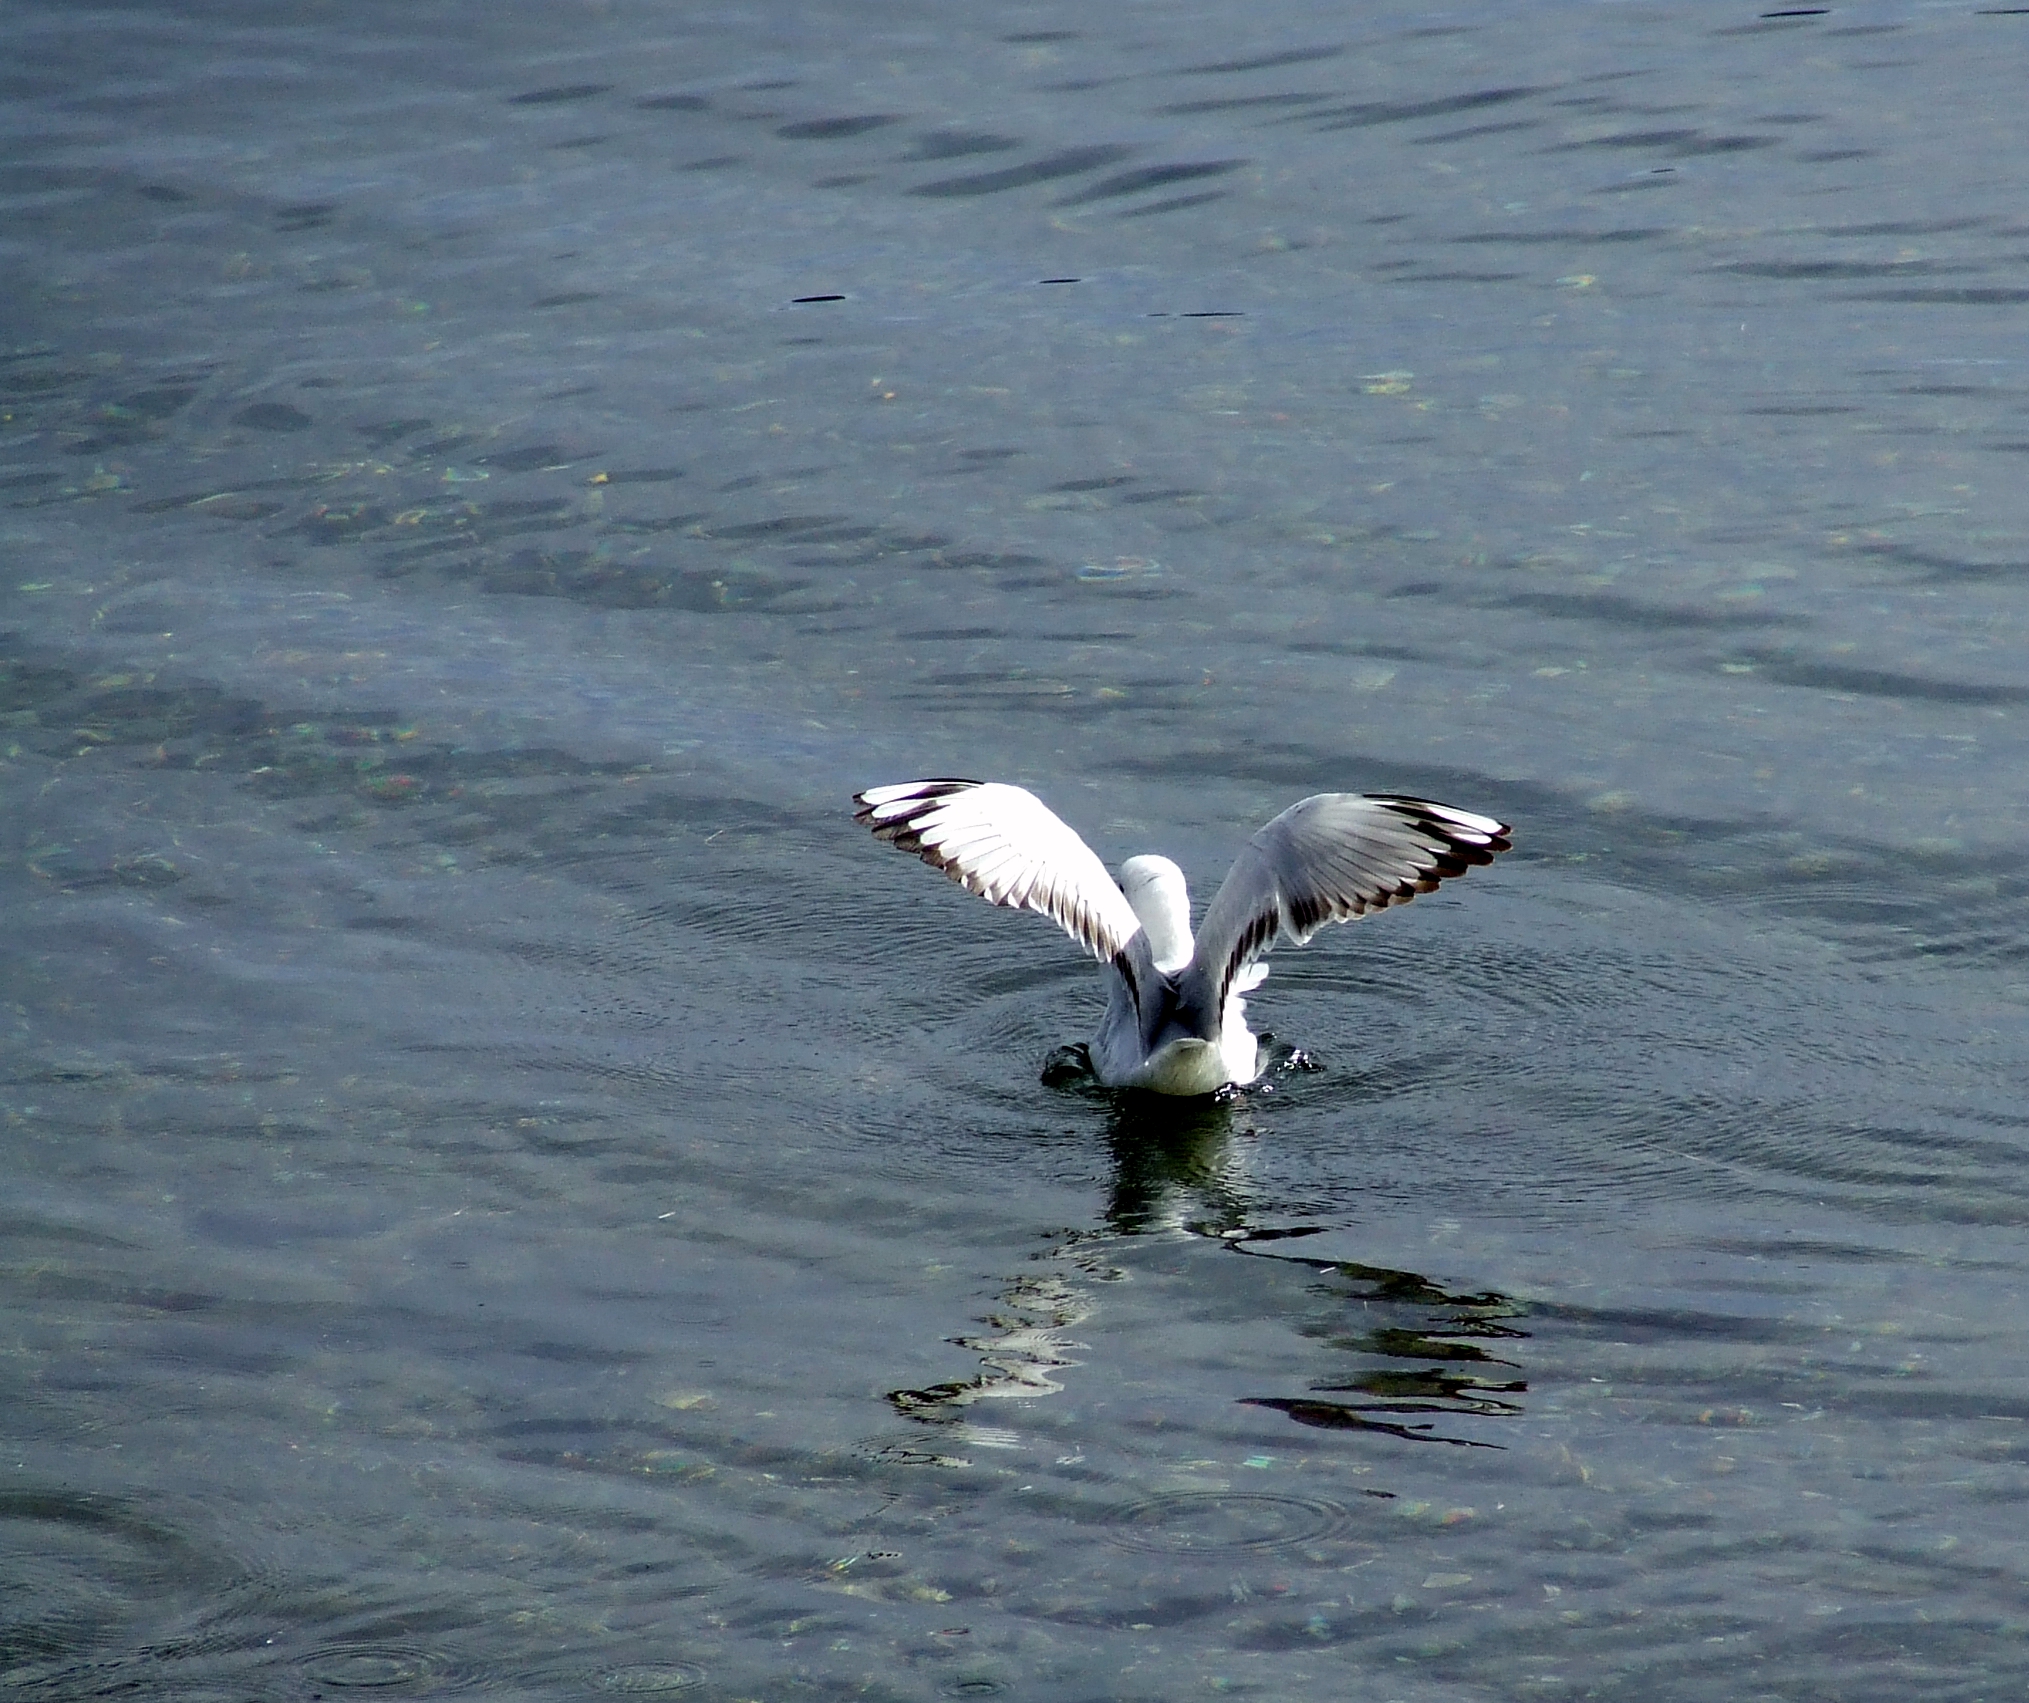 a black and white bird is gliding on the water